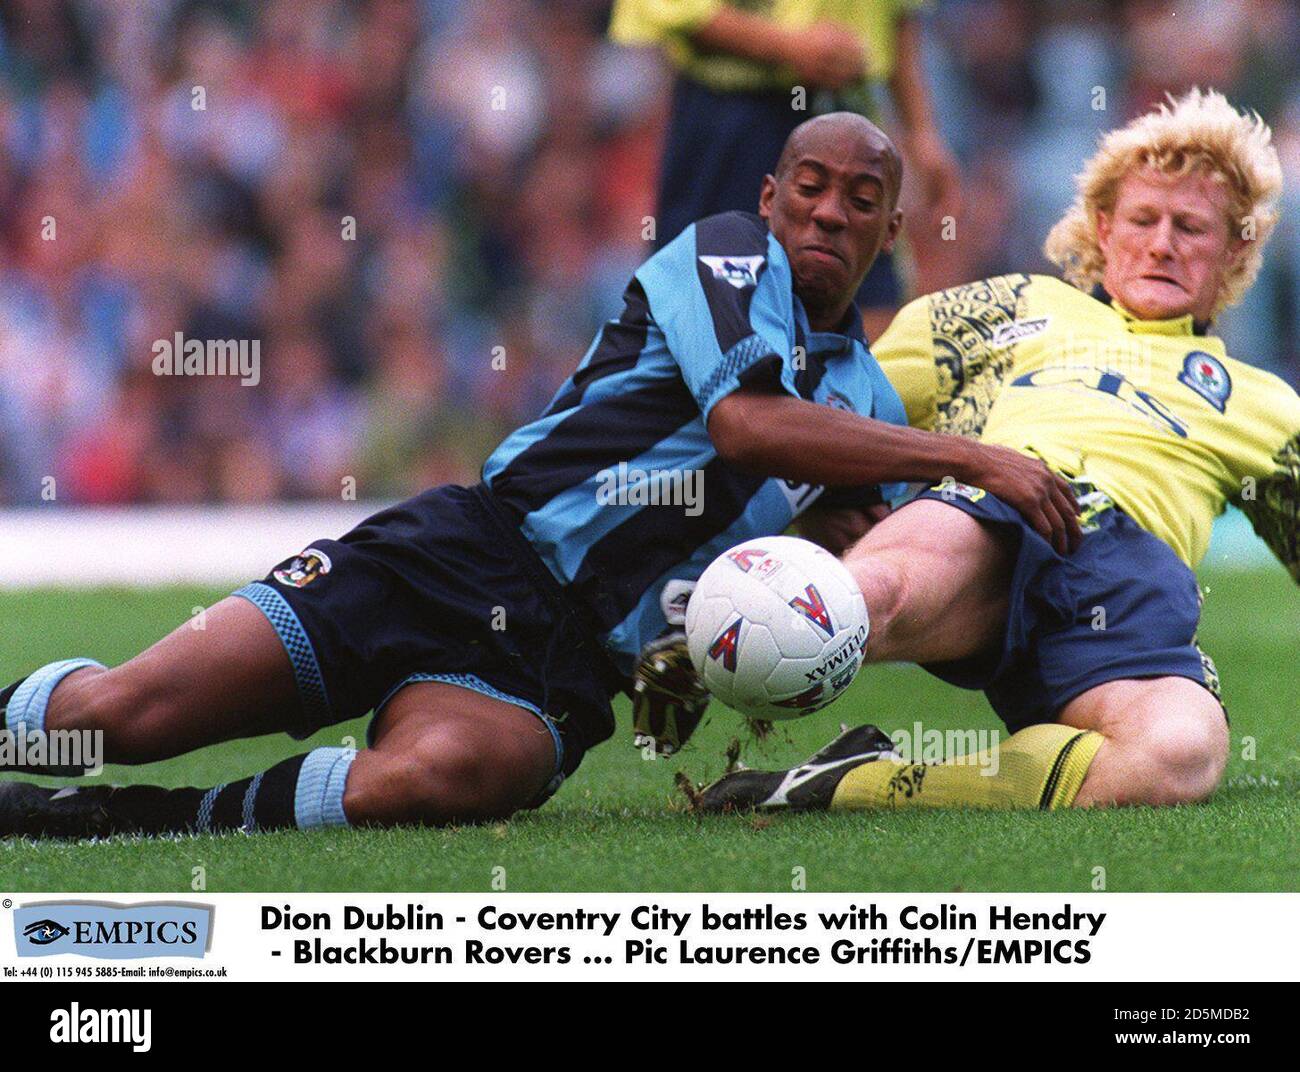 Dion Dublin - Coventry City bataille avec Colin Hendry - Blackburn Rovers Banque D'Images